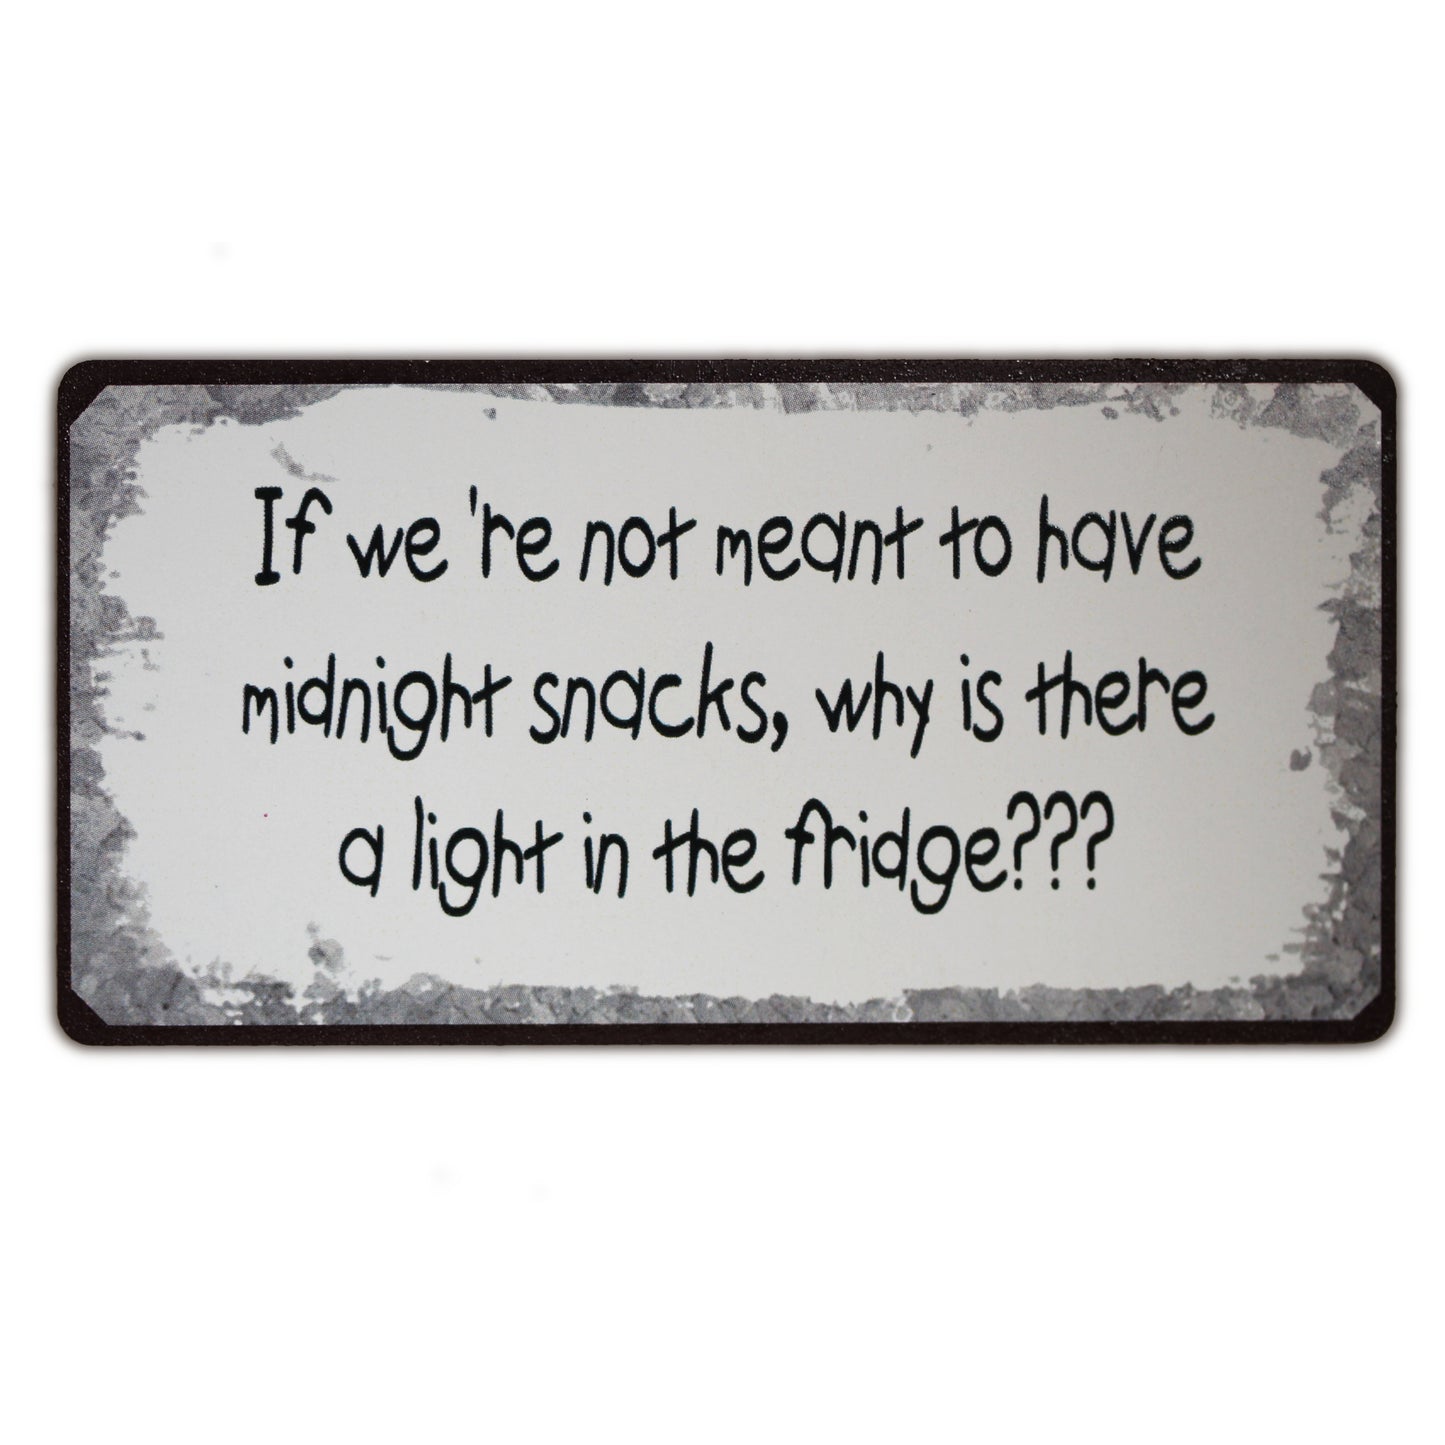 Magnet: If we're not meant to have midnight snacks, why is there a light in the fridge???